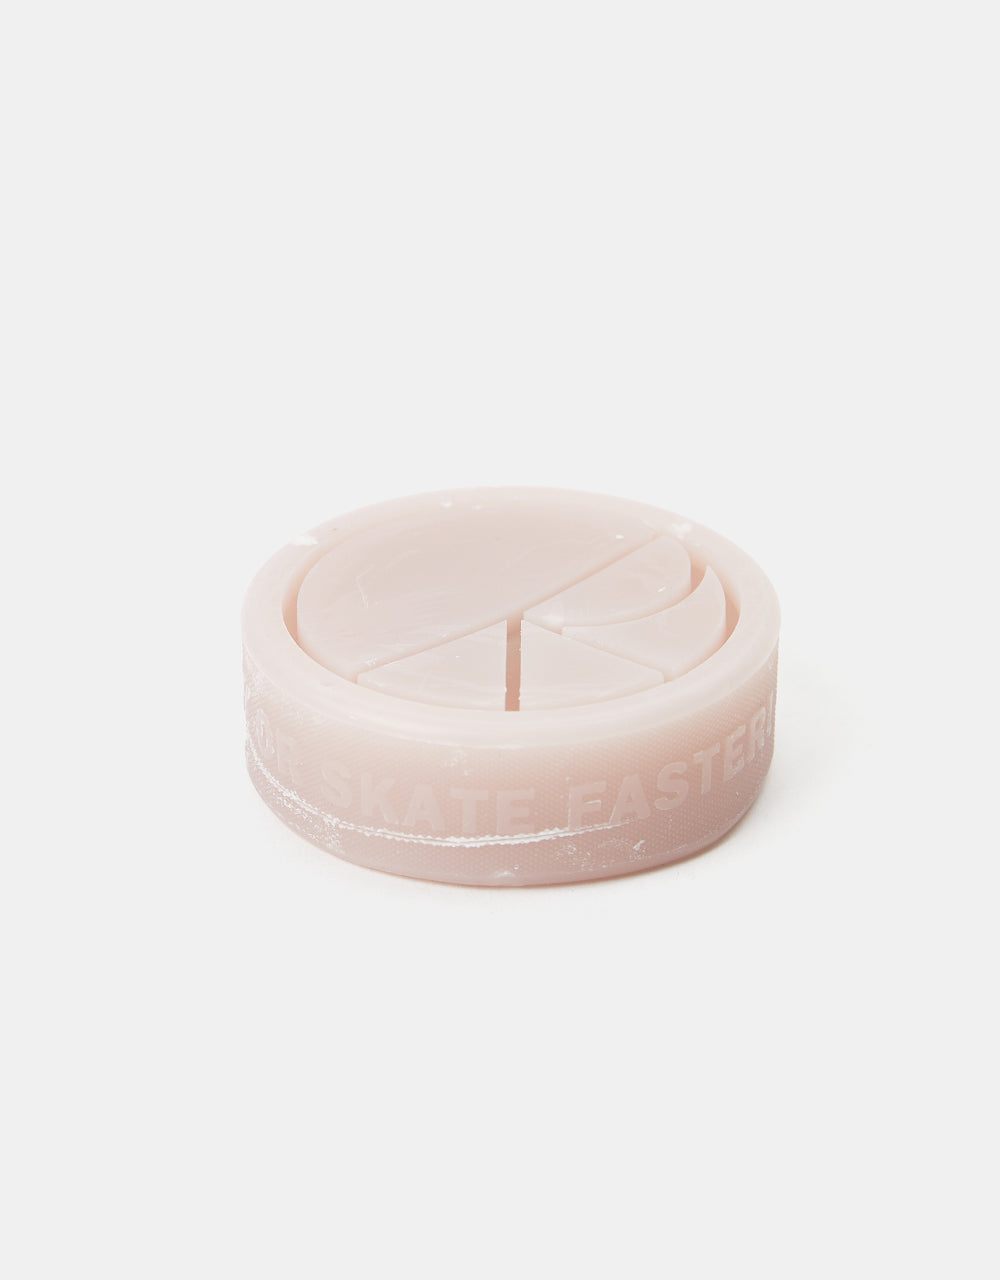 Polar Use Wisely or Skate Faster Wax - Soft Pink